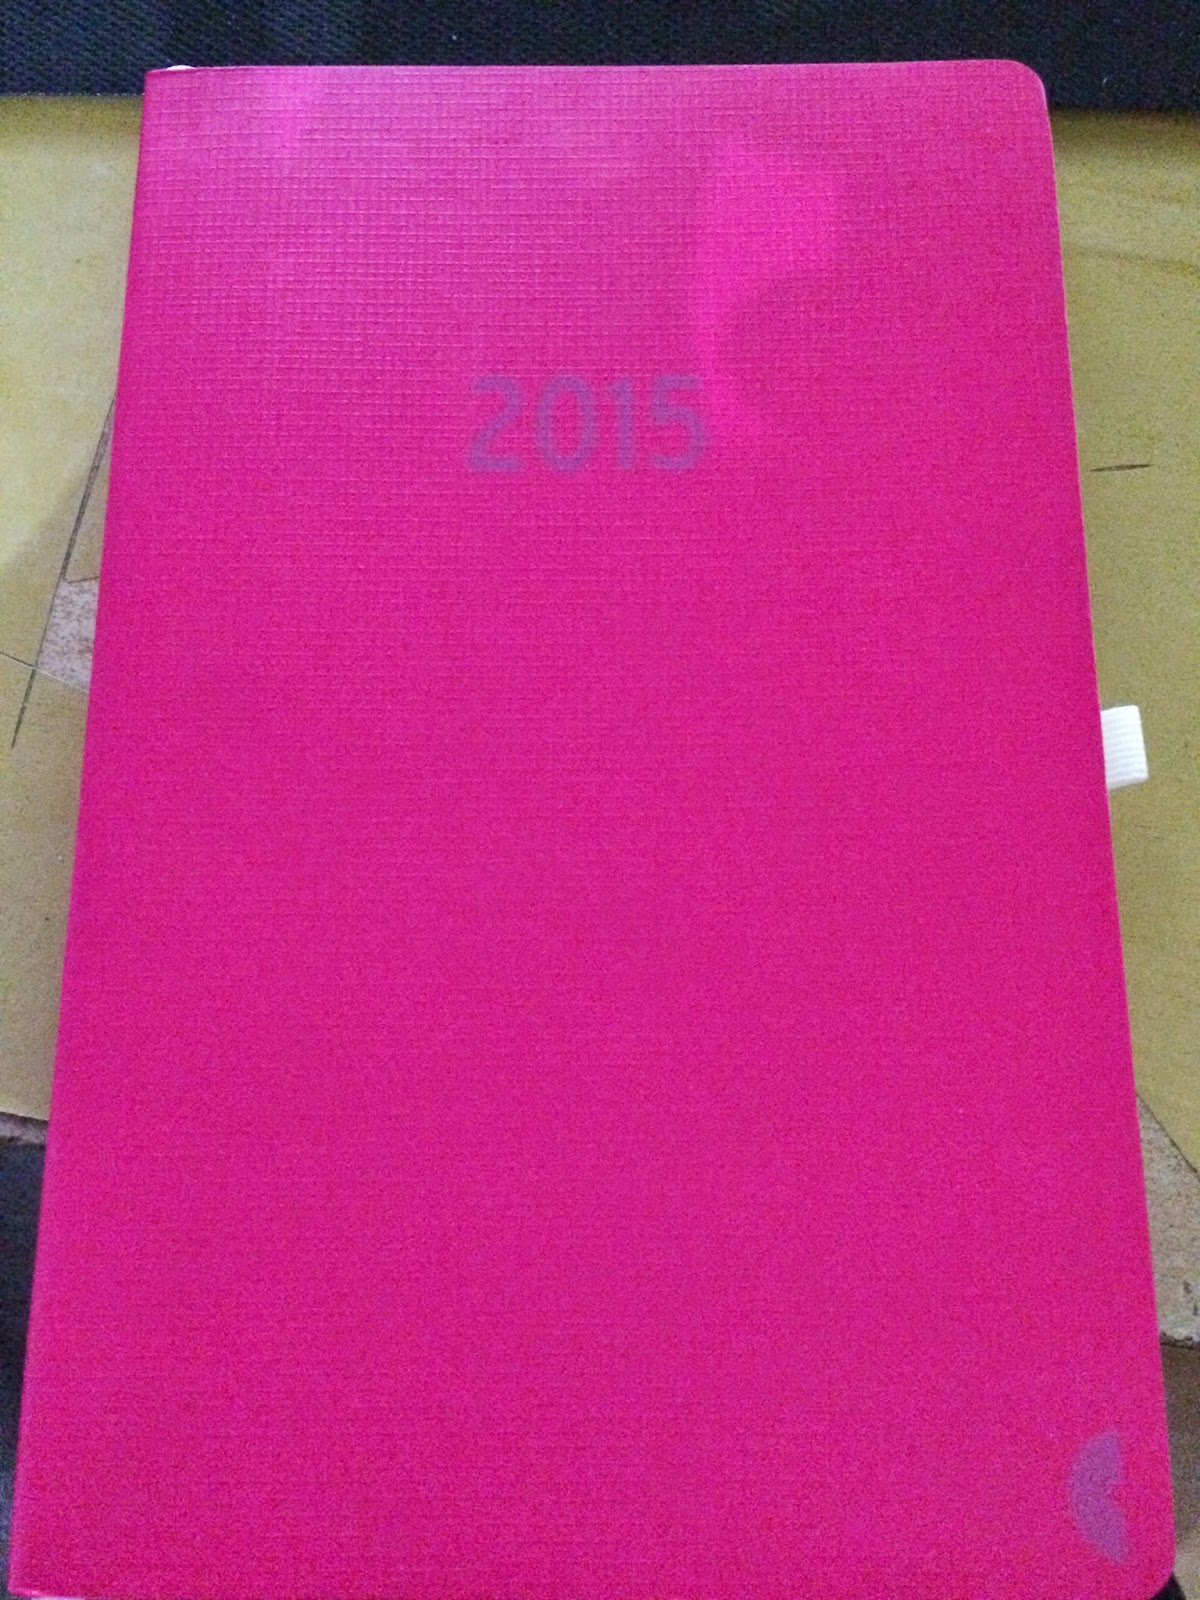 *Werbung* Produkttest Chronobook Colour Edition in Pink by Avery Zweckform 36